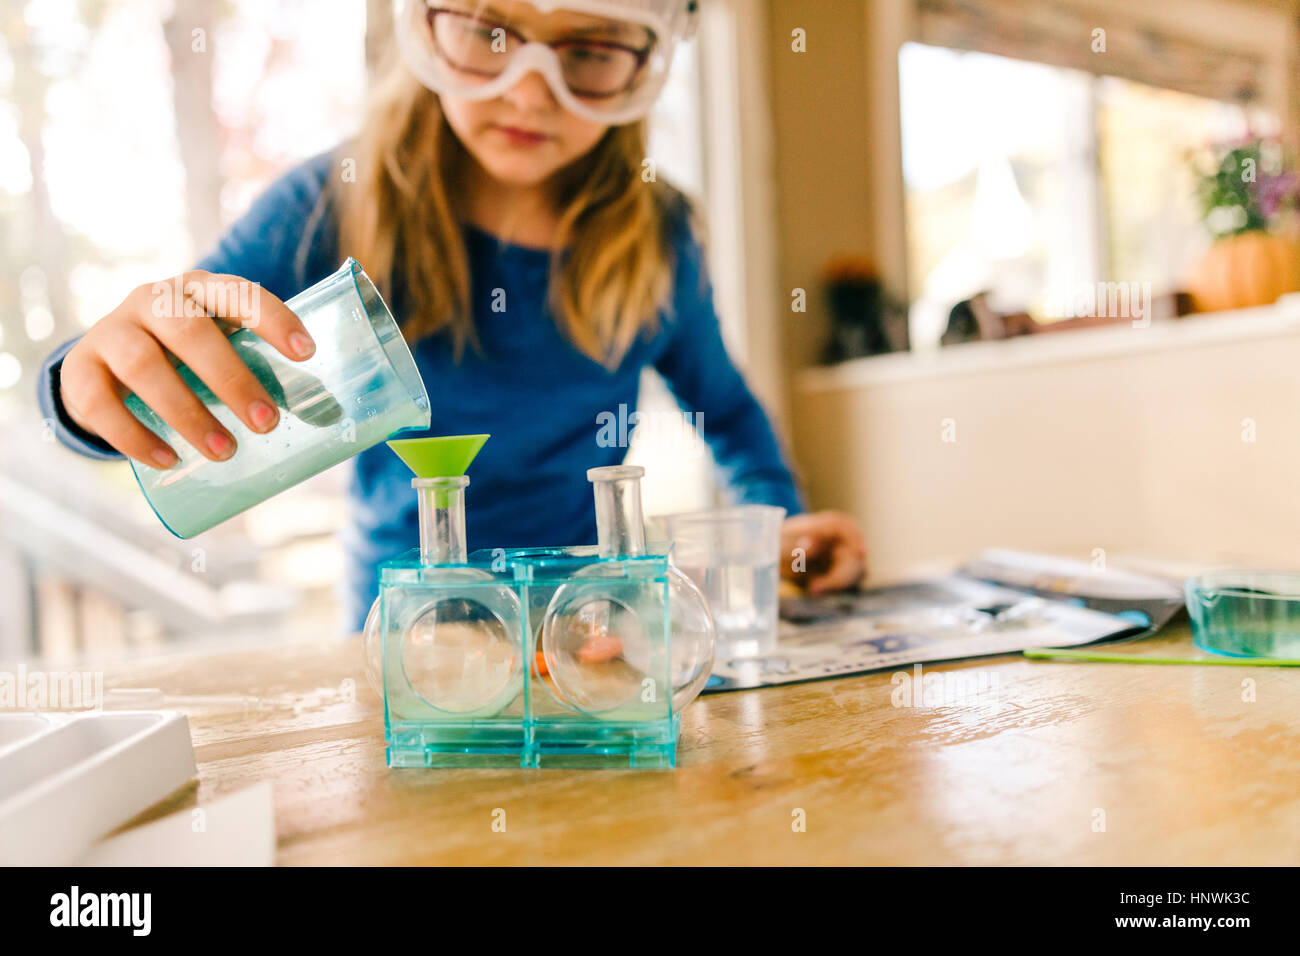 Girl doing science experiment, pouring liquid into flask Stock Photo